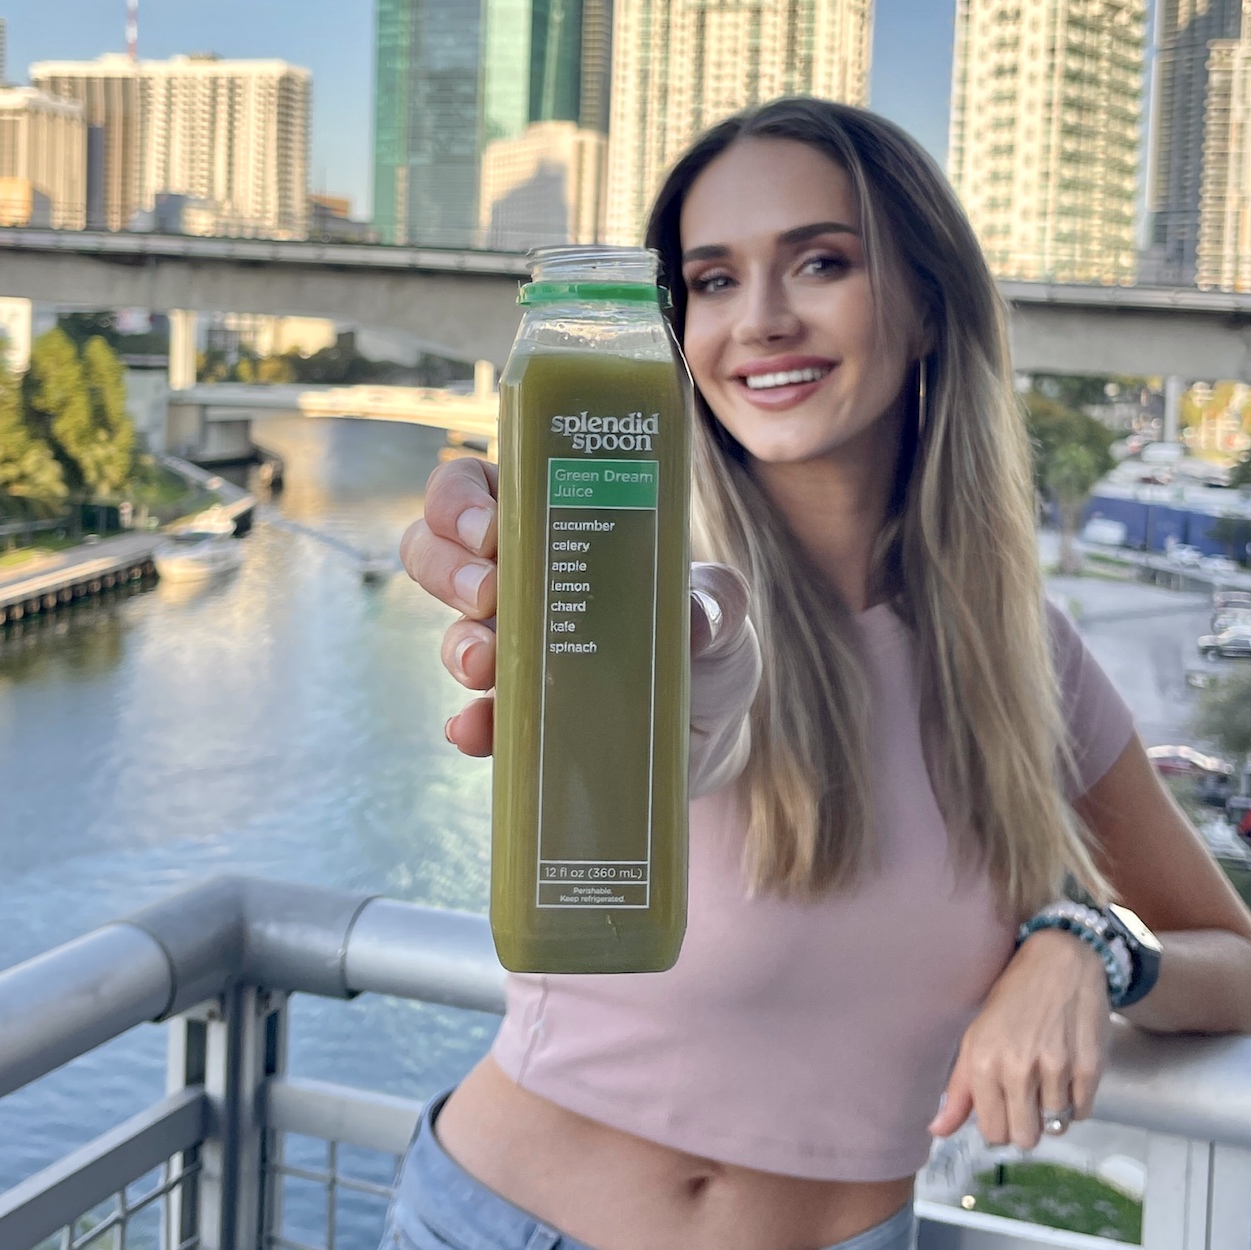 A woman stands on a balcony overlooking the Miami River in Miami, FL. Behind her are tall buildings, illuminated at sunset. She is holding a Splenid Spoon Green Dream Juice out in front of her.